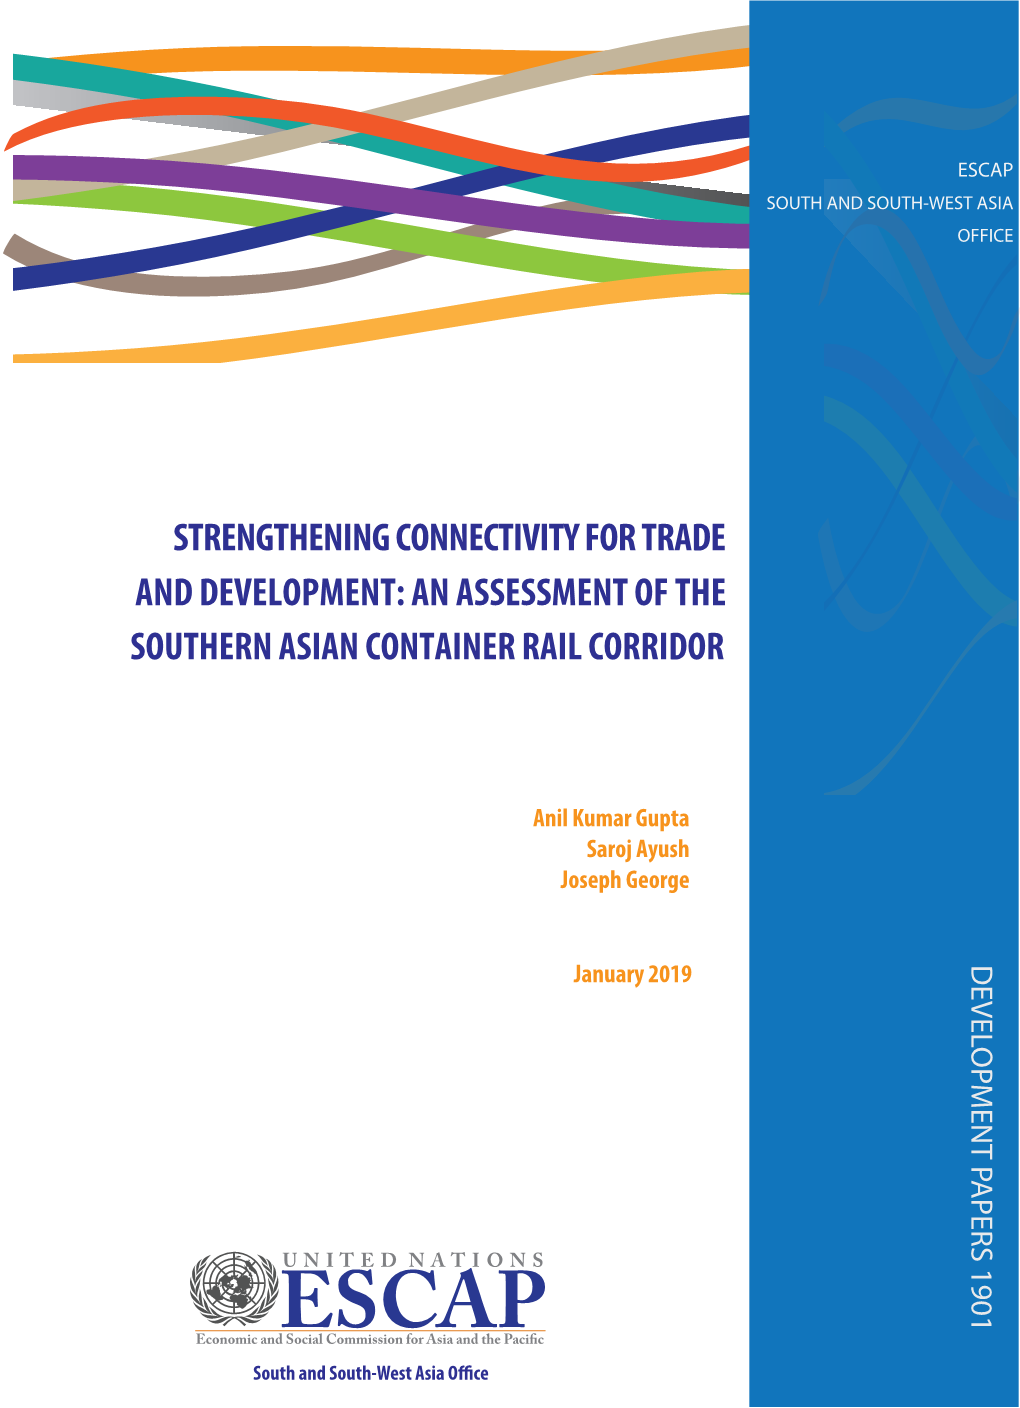 An Assessment of the Southern Asian Container Rail Corridor